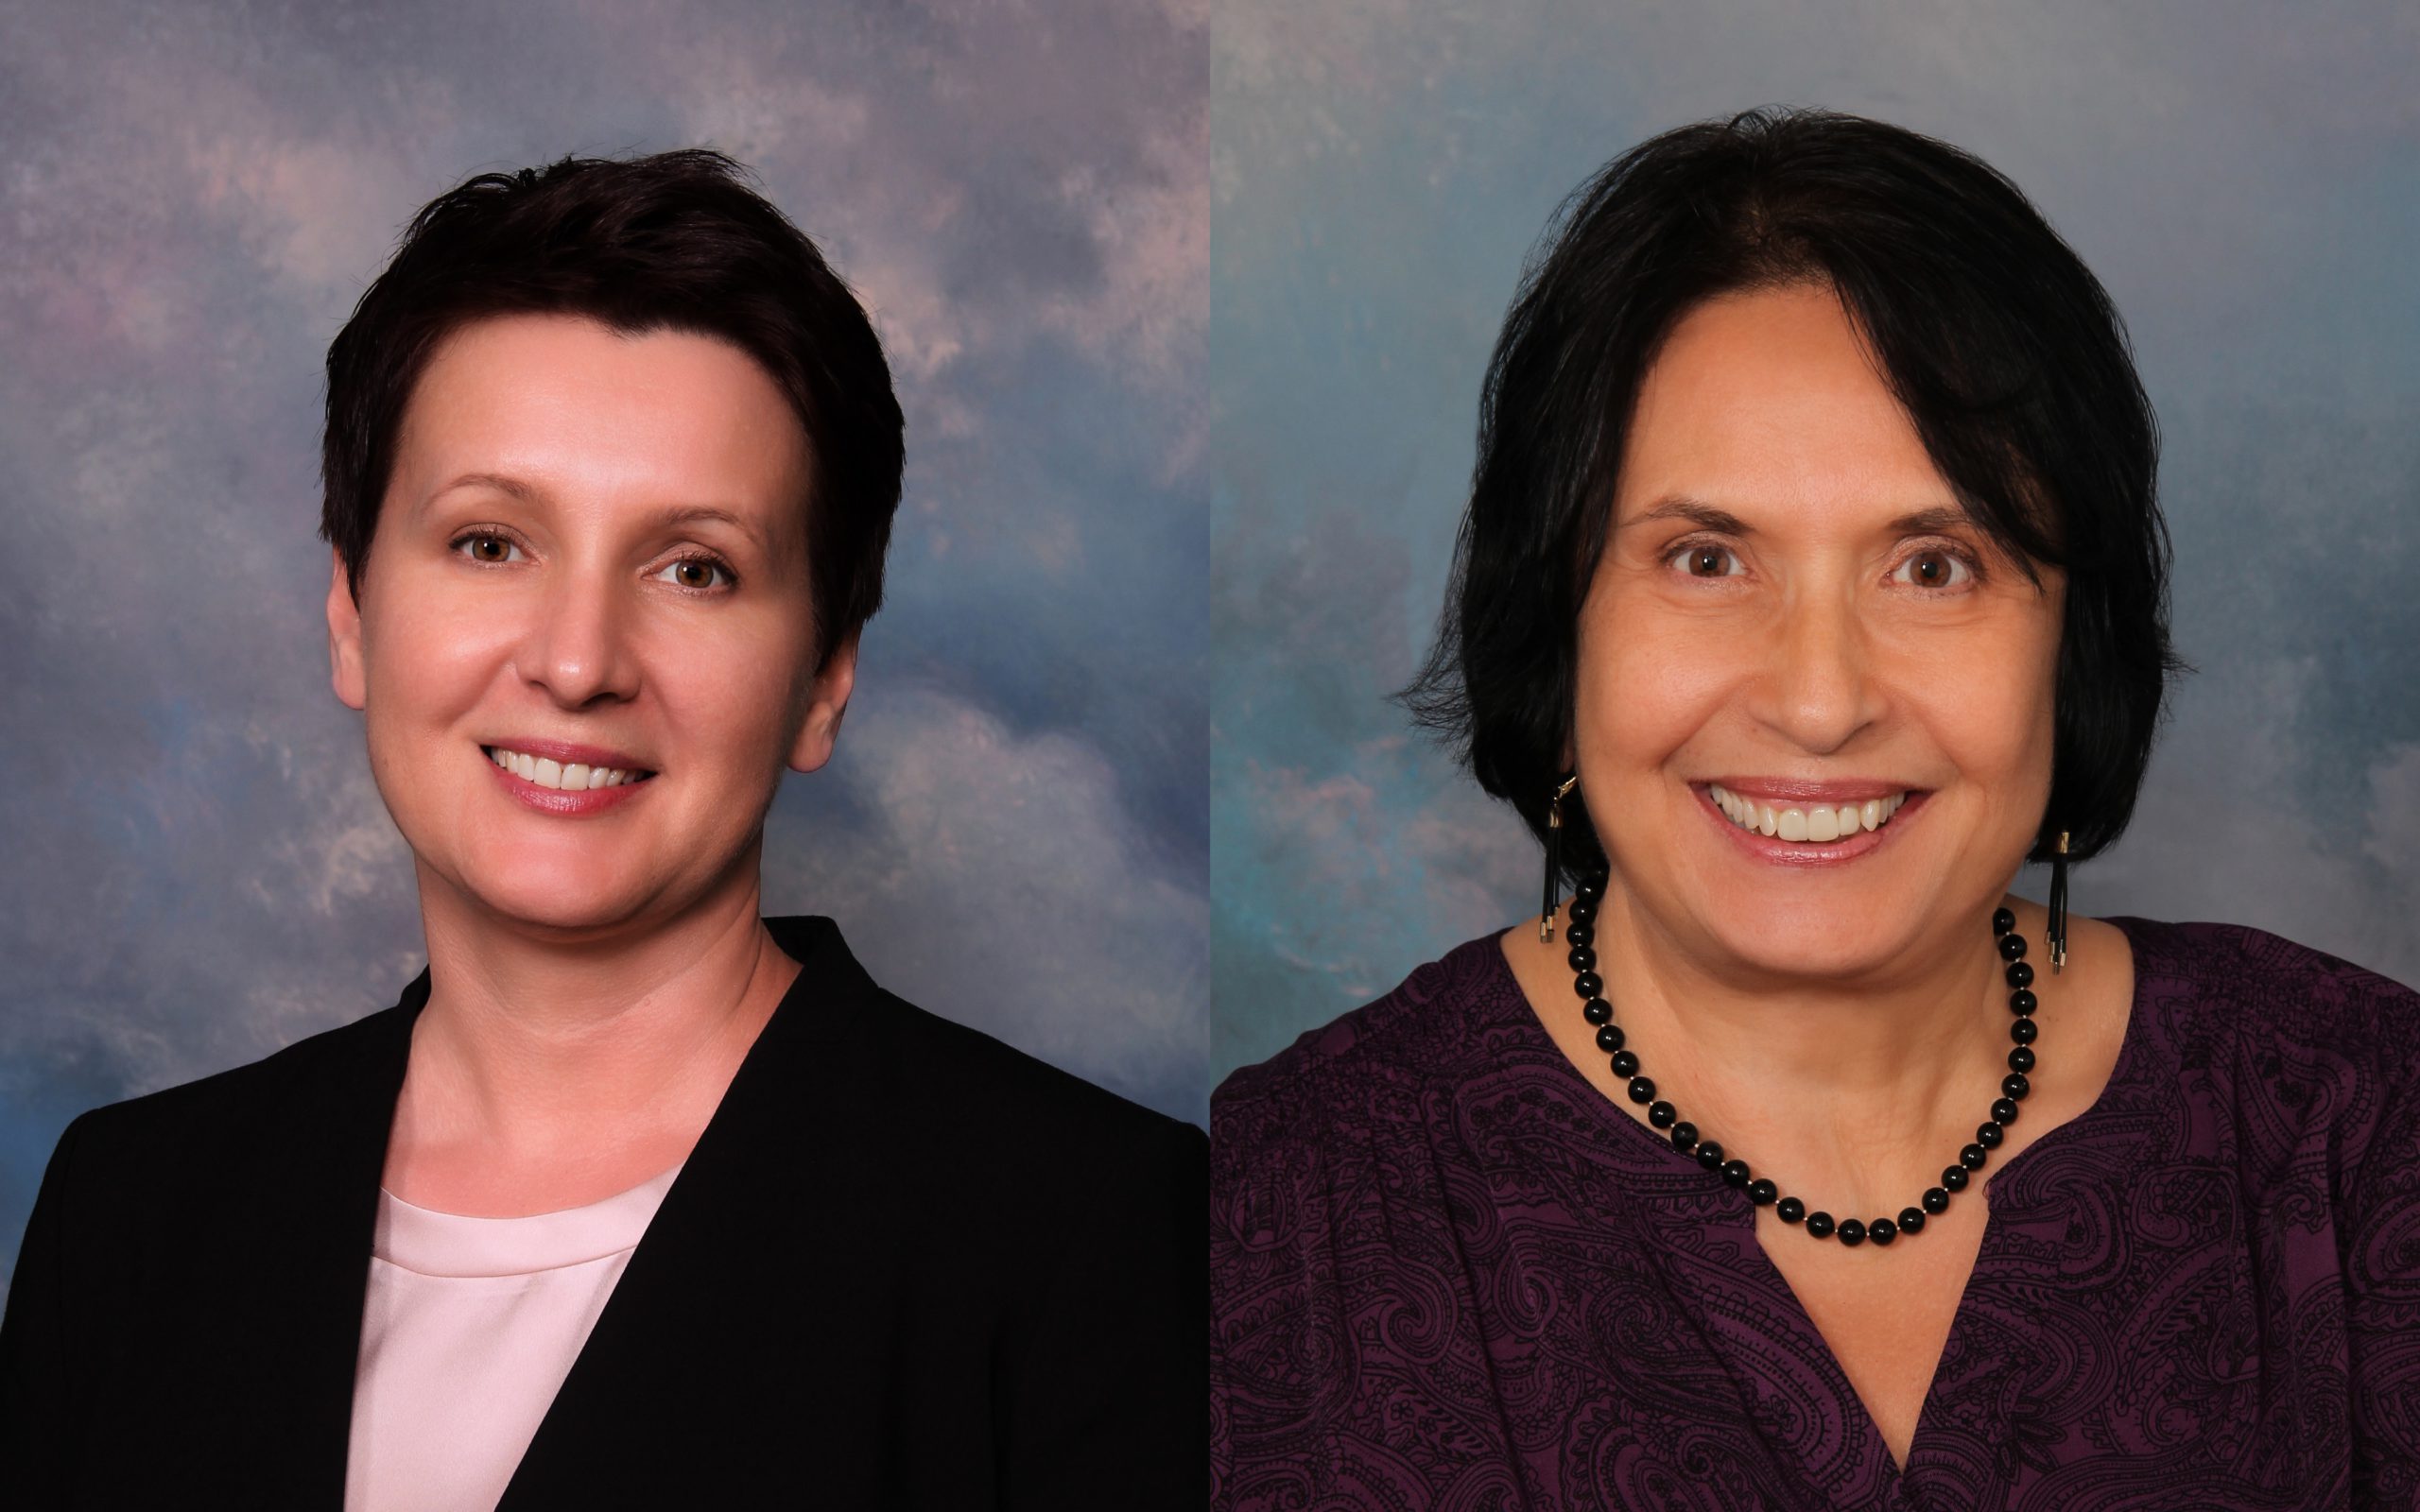 Oksana Hagerty is a learning specialist and the assistant director of the Center for Student Success, and Nicki Nance is an associate professor of human services and psychology at Beacon College in Leesburg, Florida.